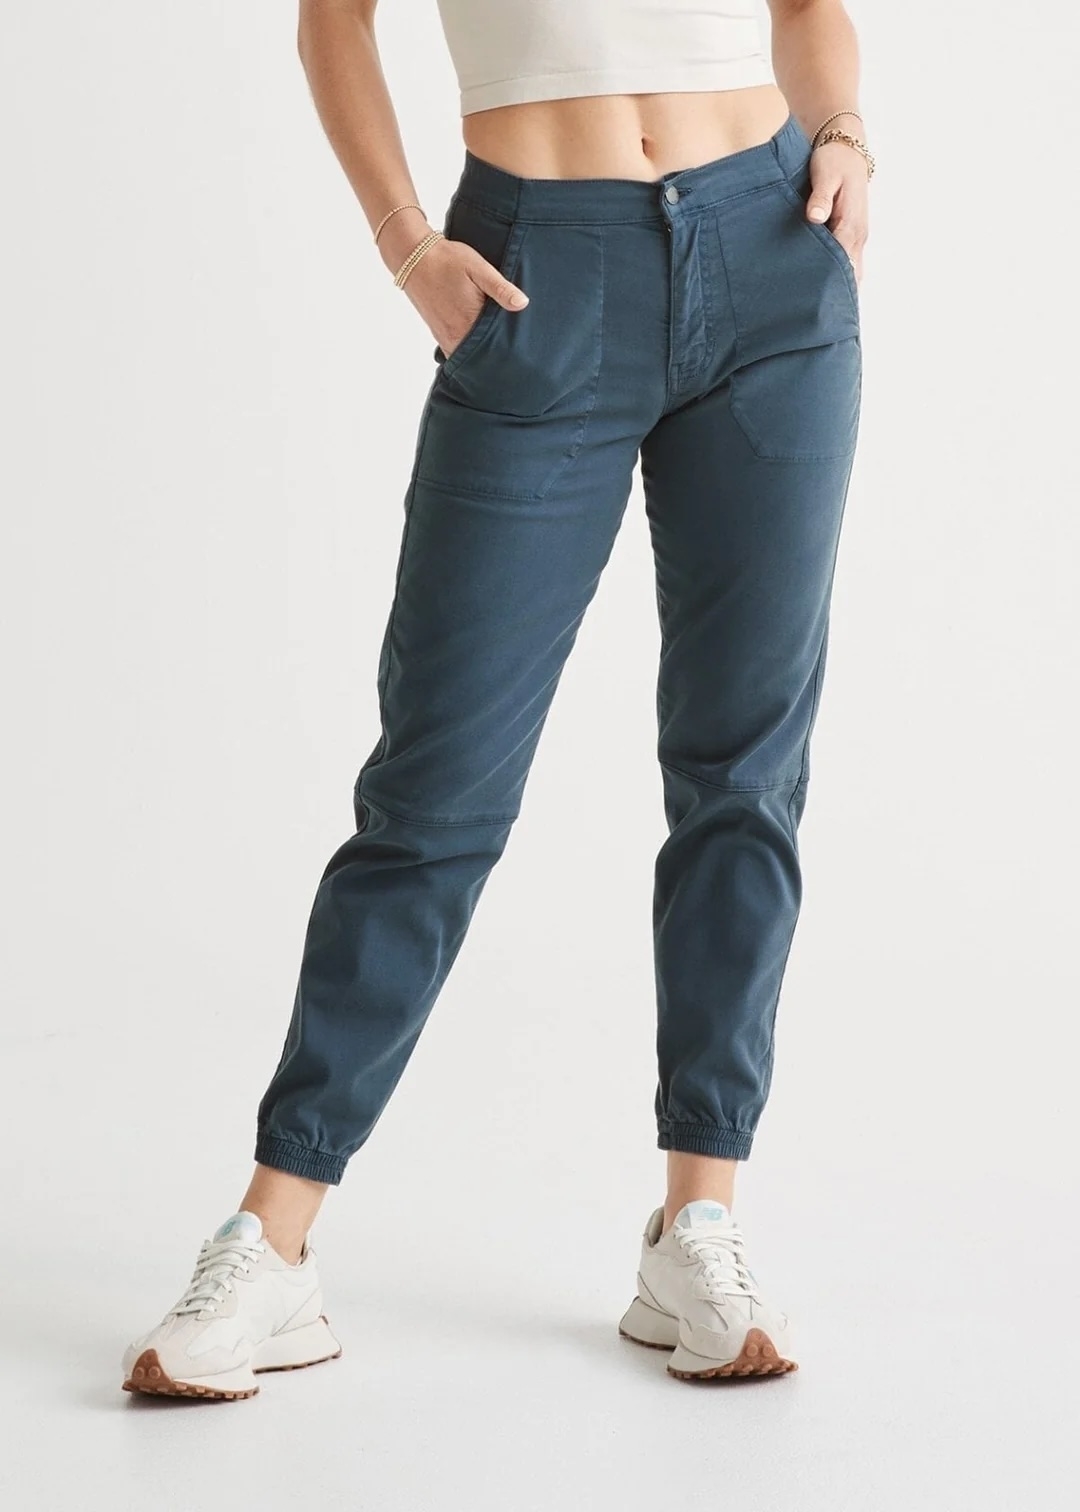 A model wearing  blue mid-rise casual pants with pockets paired with sneakers, showing from the waist down